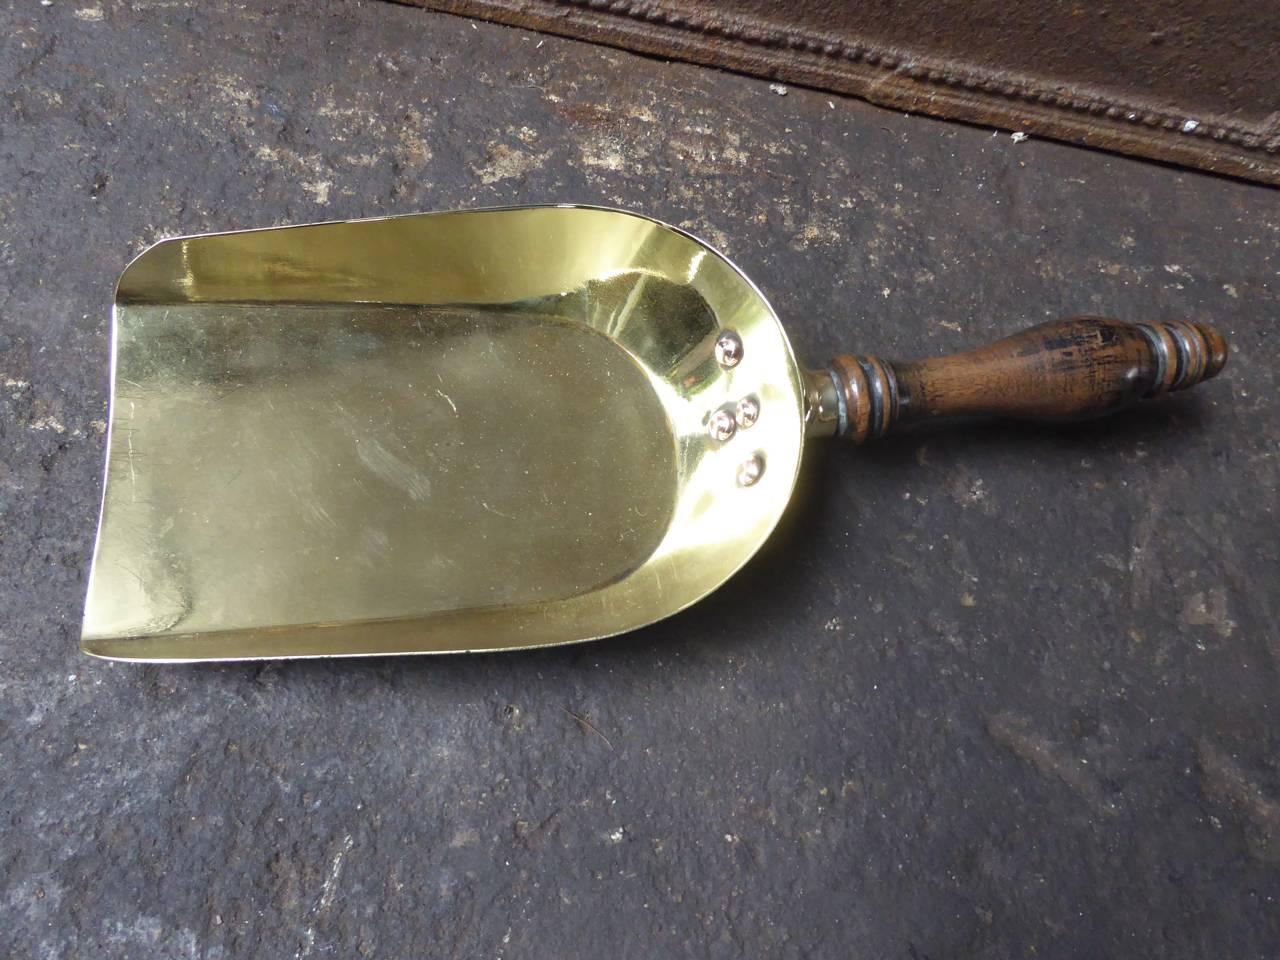 19th century English fireshovel made of polished brass, polished copper and wood.